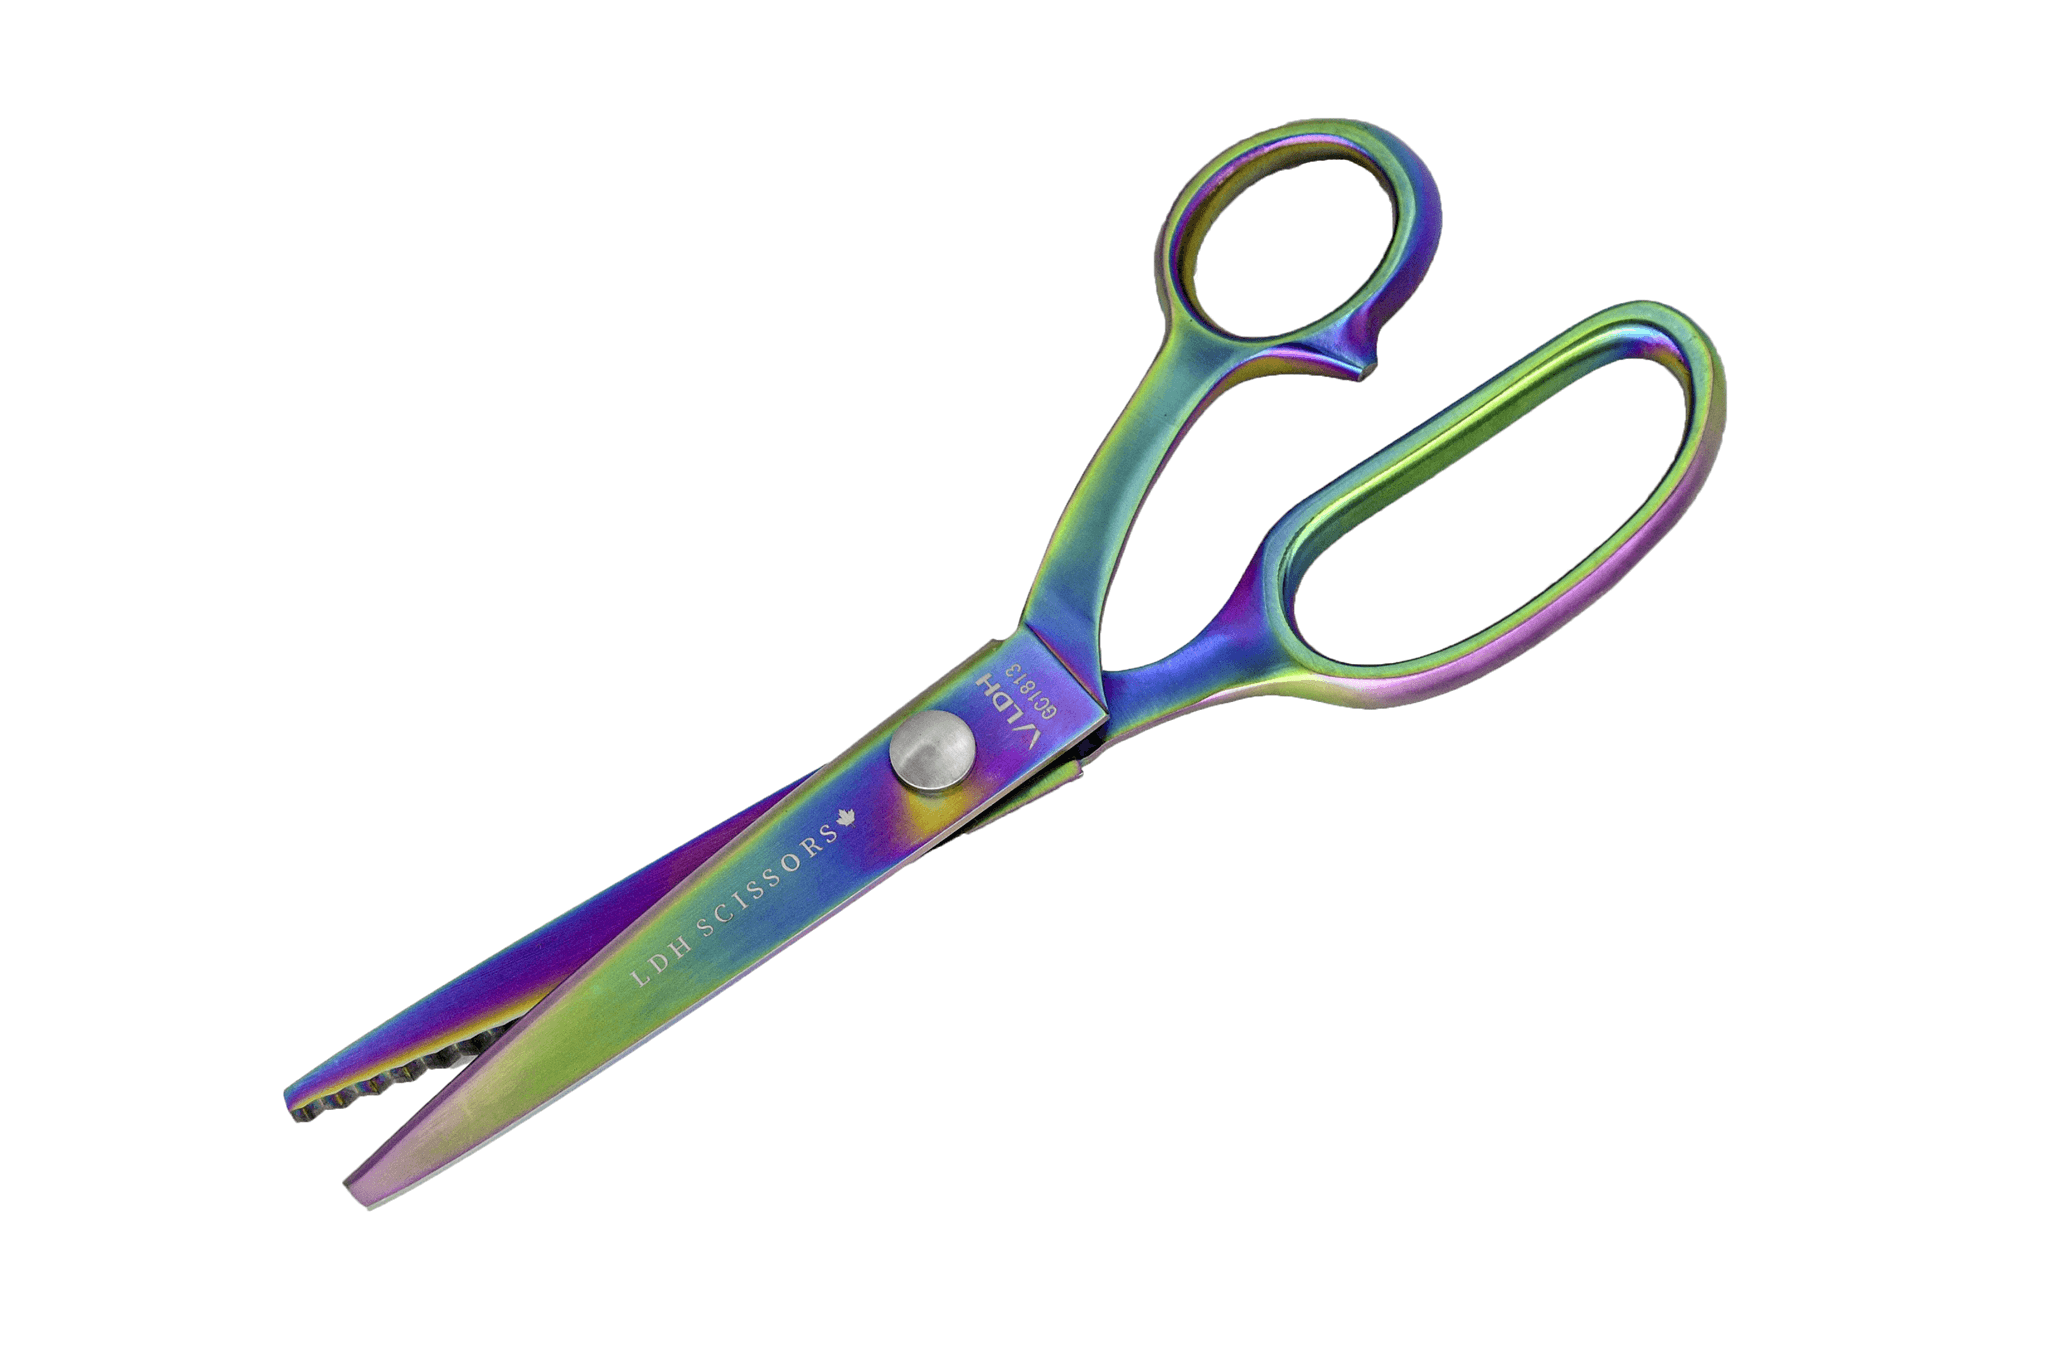 Pair of WISS Pinking Shears Sewing Fabric Cutting Scissors 9